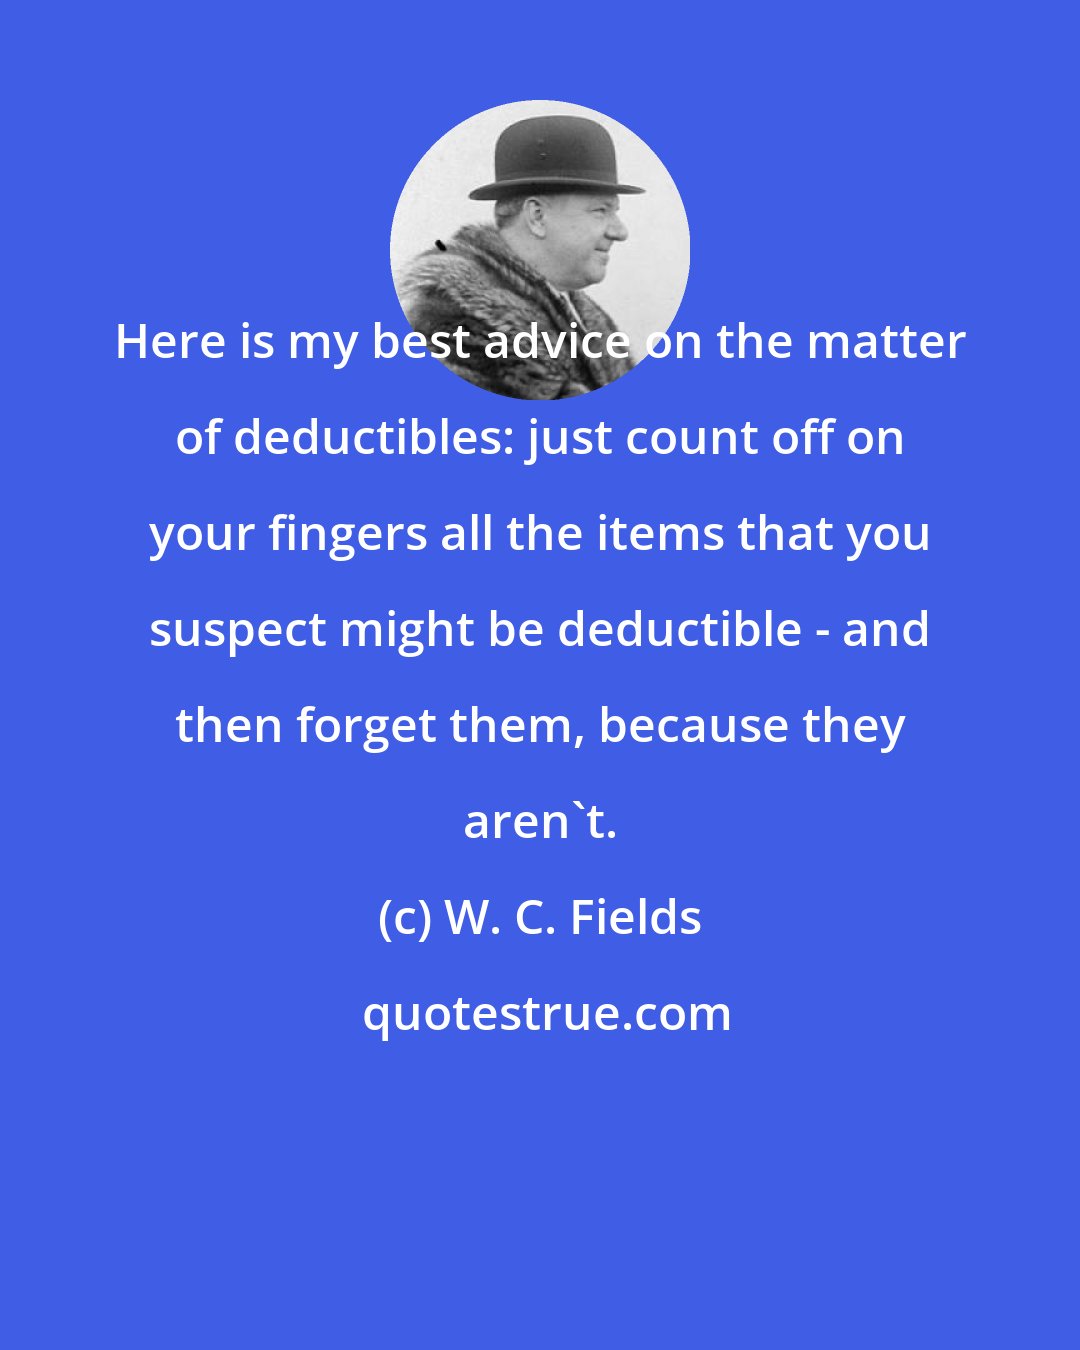 W. C. Fields: Here is my best advice on the matter of deductibles: just count off on your fingers all the items that you suspect might be deductible - and then forget them, because they aren't.